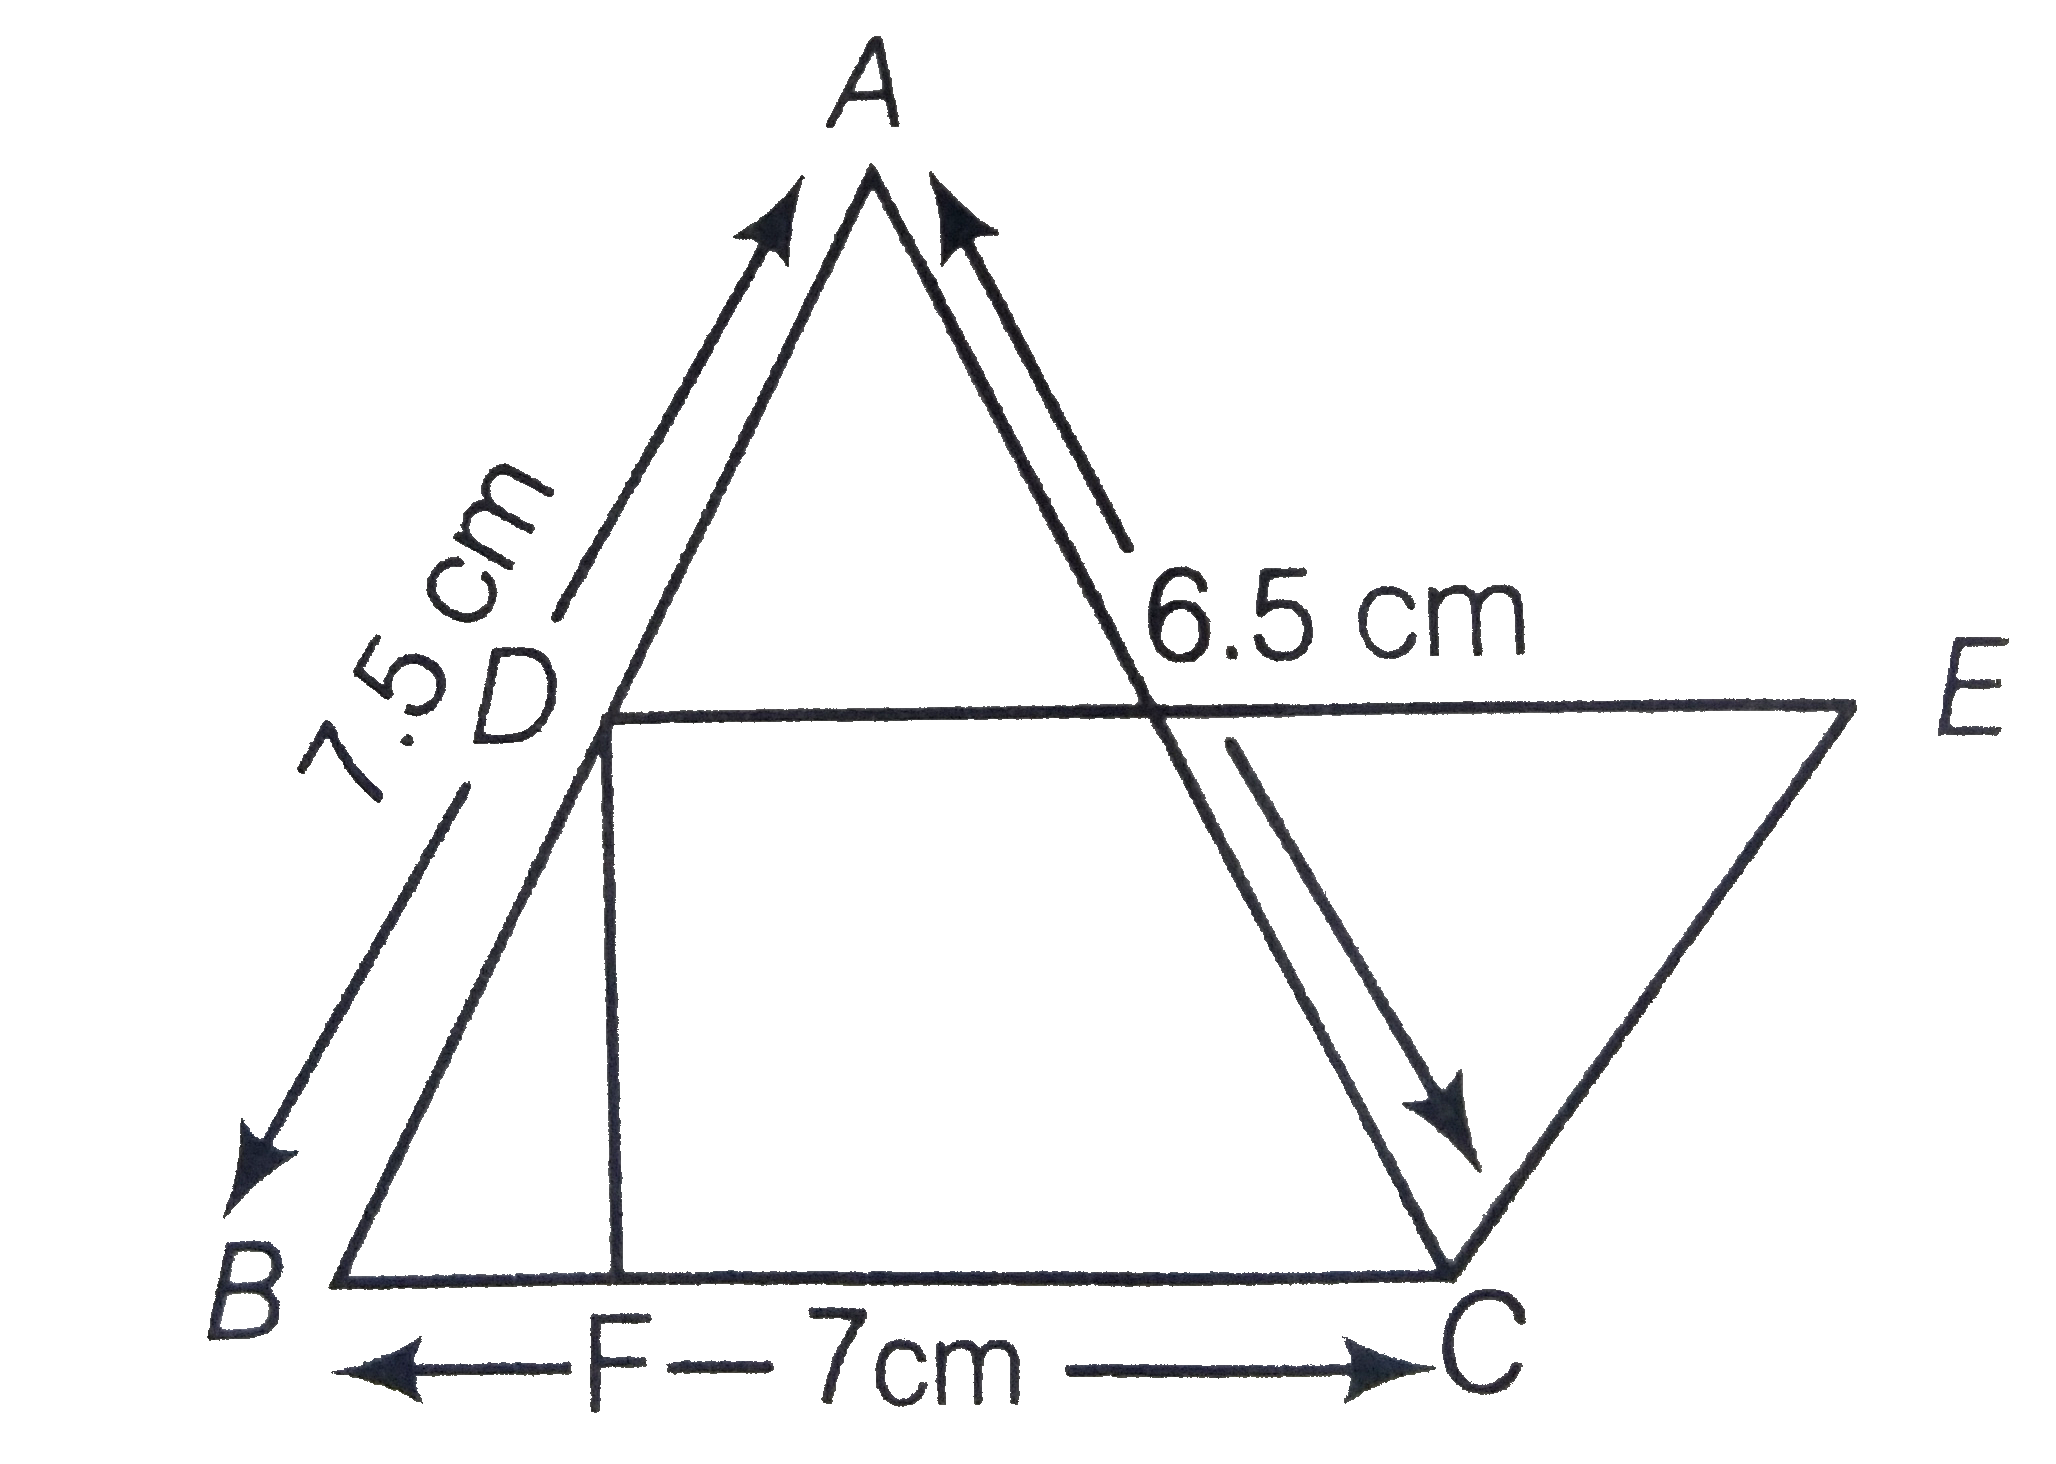 In figure, triangleABC has sides AB=7.5 cm, AC = 6.5 cm and BC=7cm. On base BC a parallelogram DBCE of same area as that of triangleABC is constructed. Find the height DF of the parallelogram.